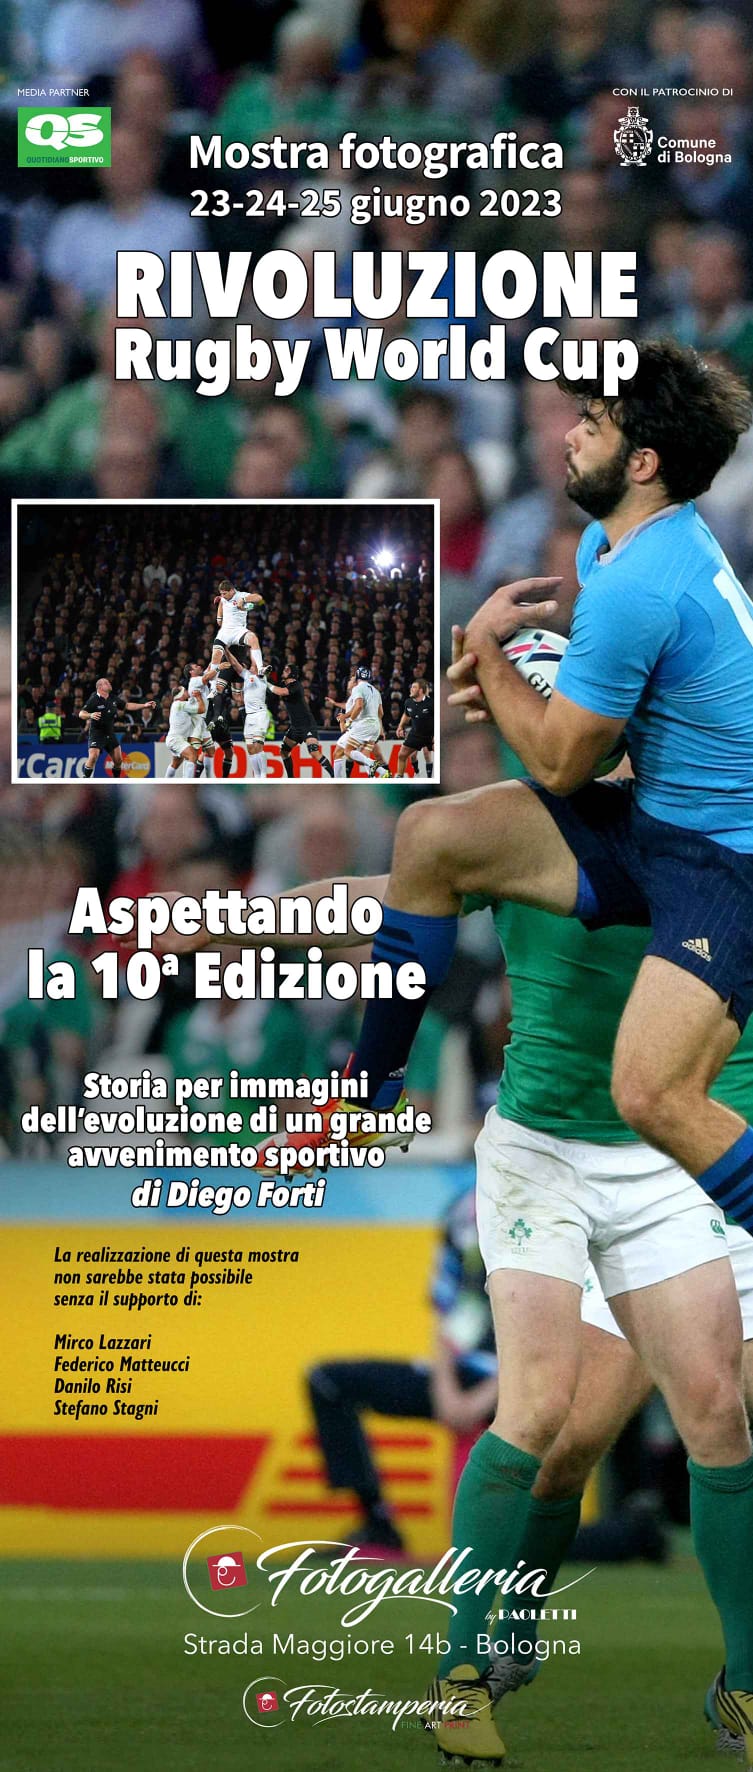 Mostra fotografica Rugby World Cup Diego Forti